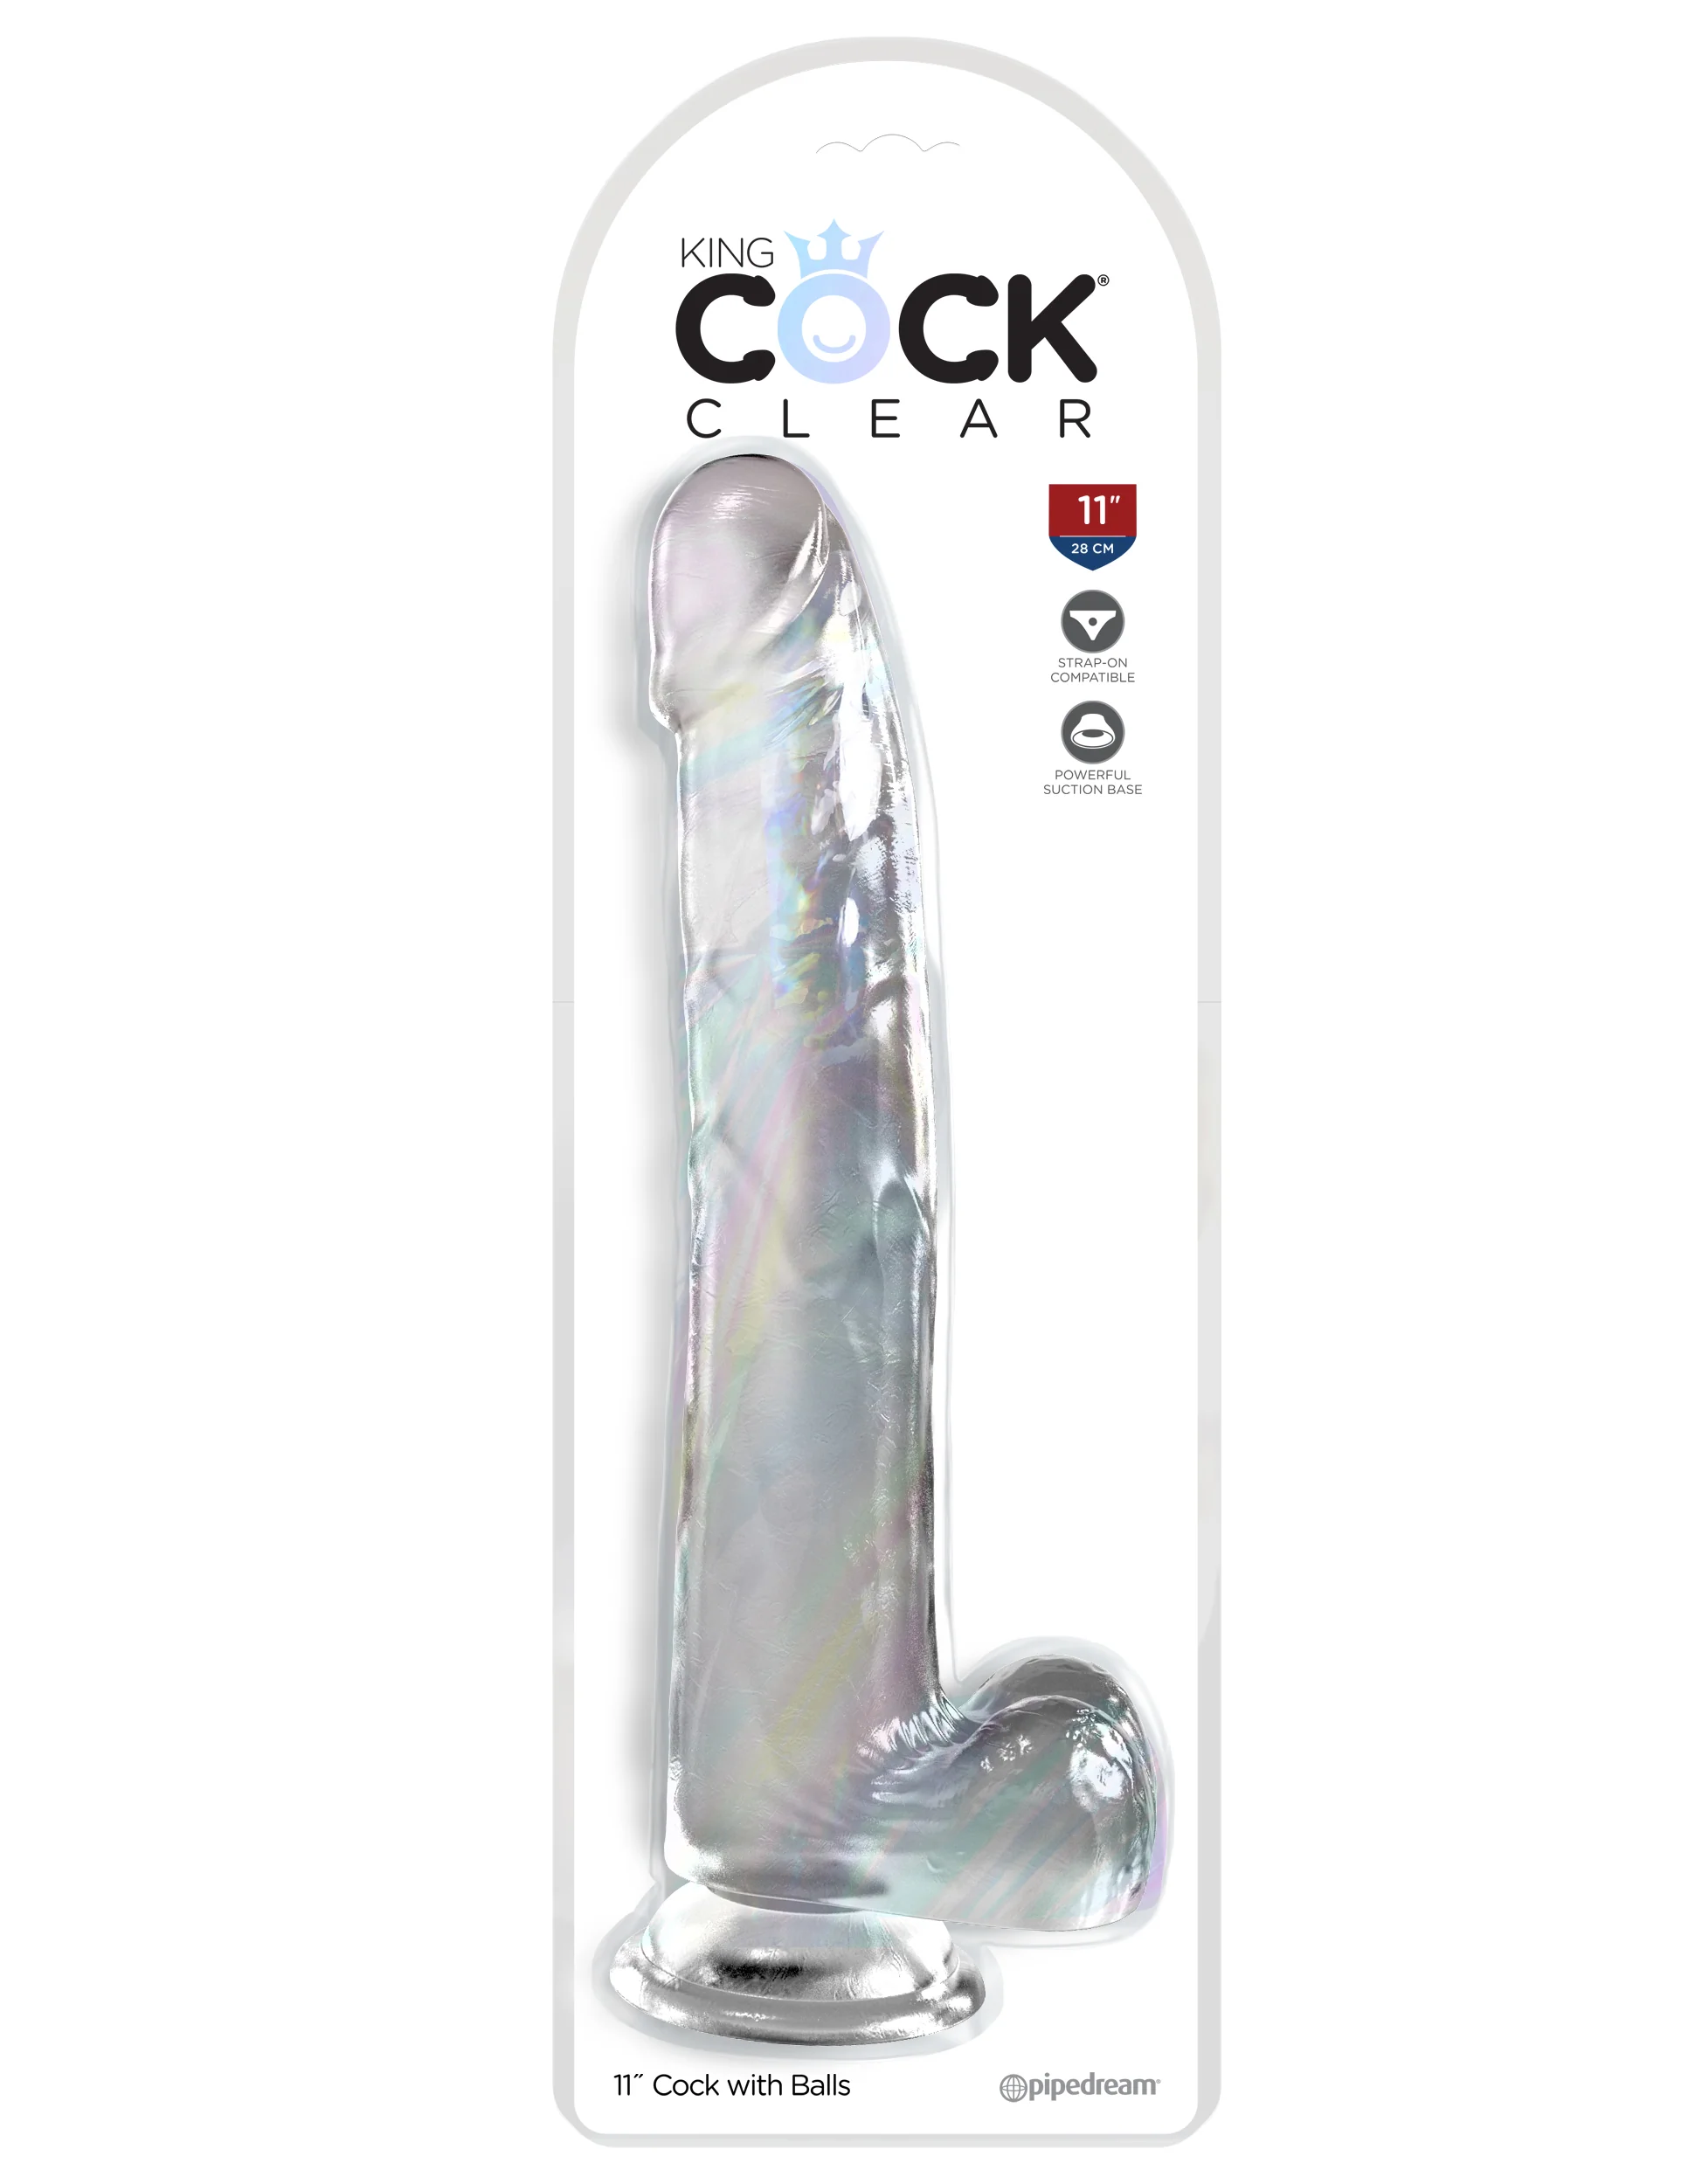       King Cock Clear 11